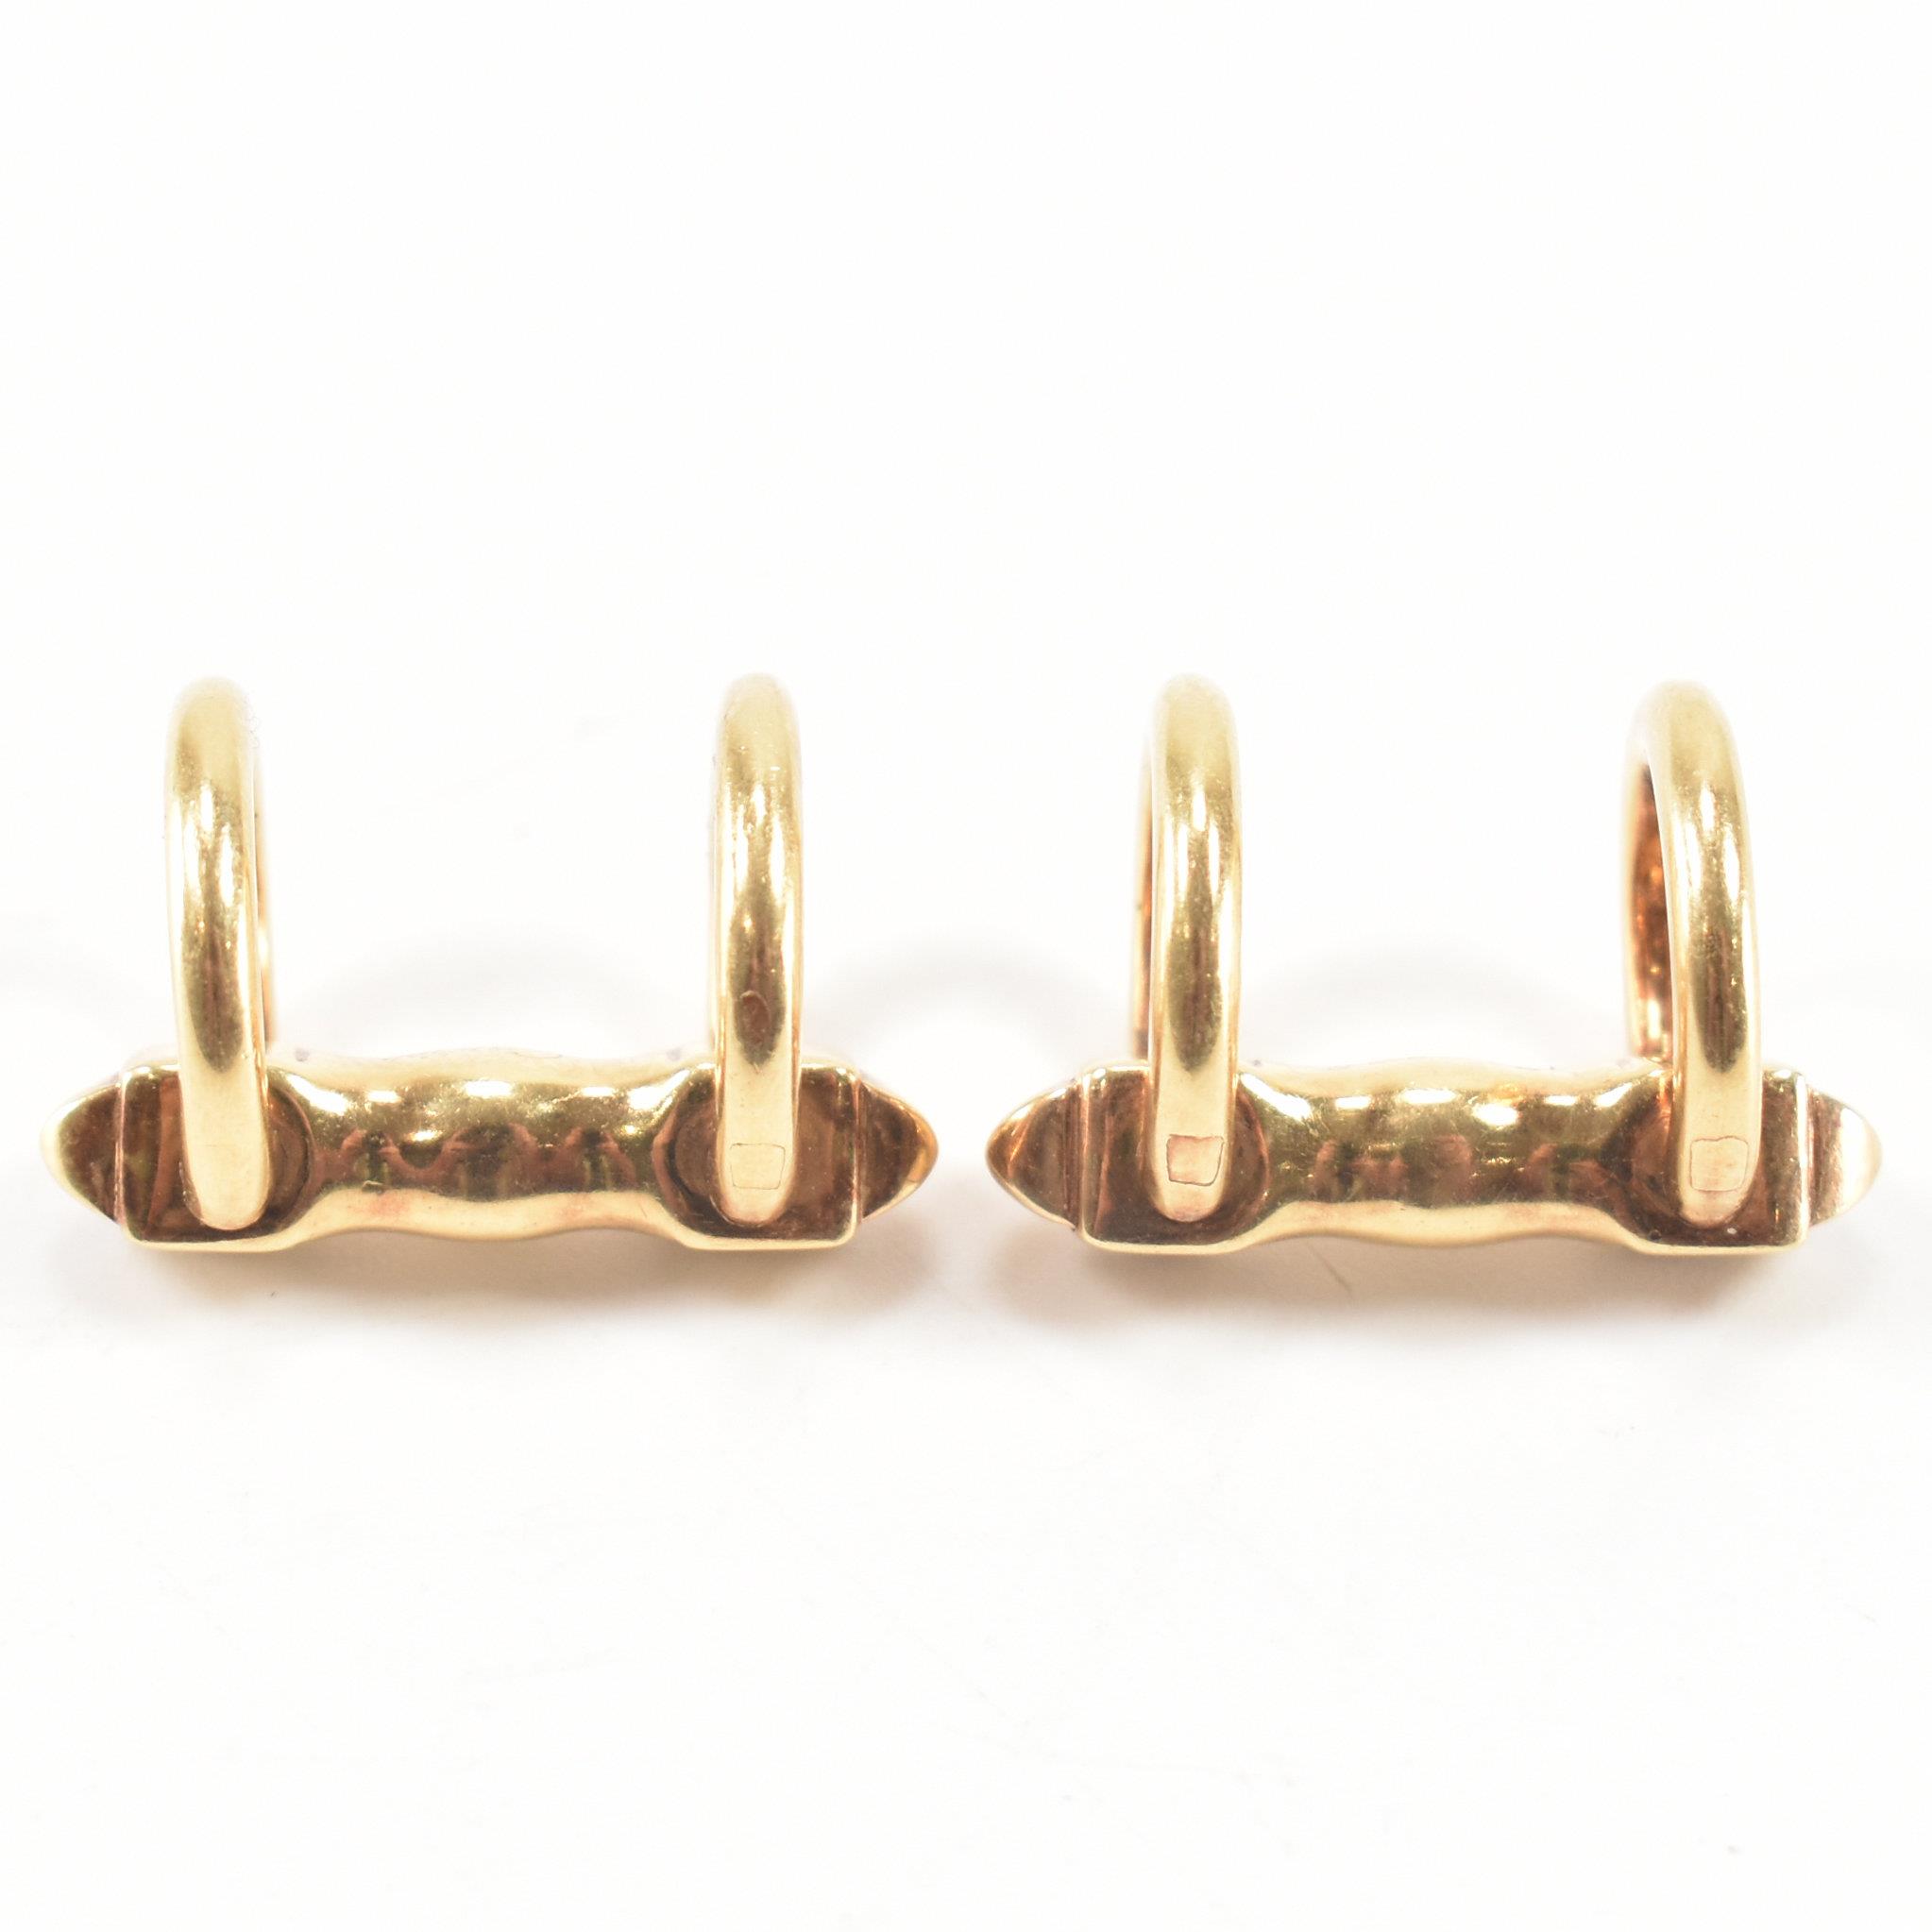 PAIR OF 18CT GOLD STIRRUP CUFFLINKS SINGED CARTIER - Image 5 of 5